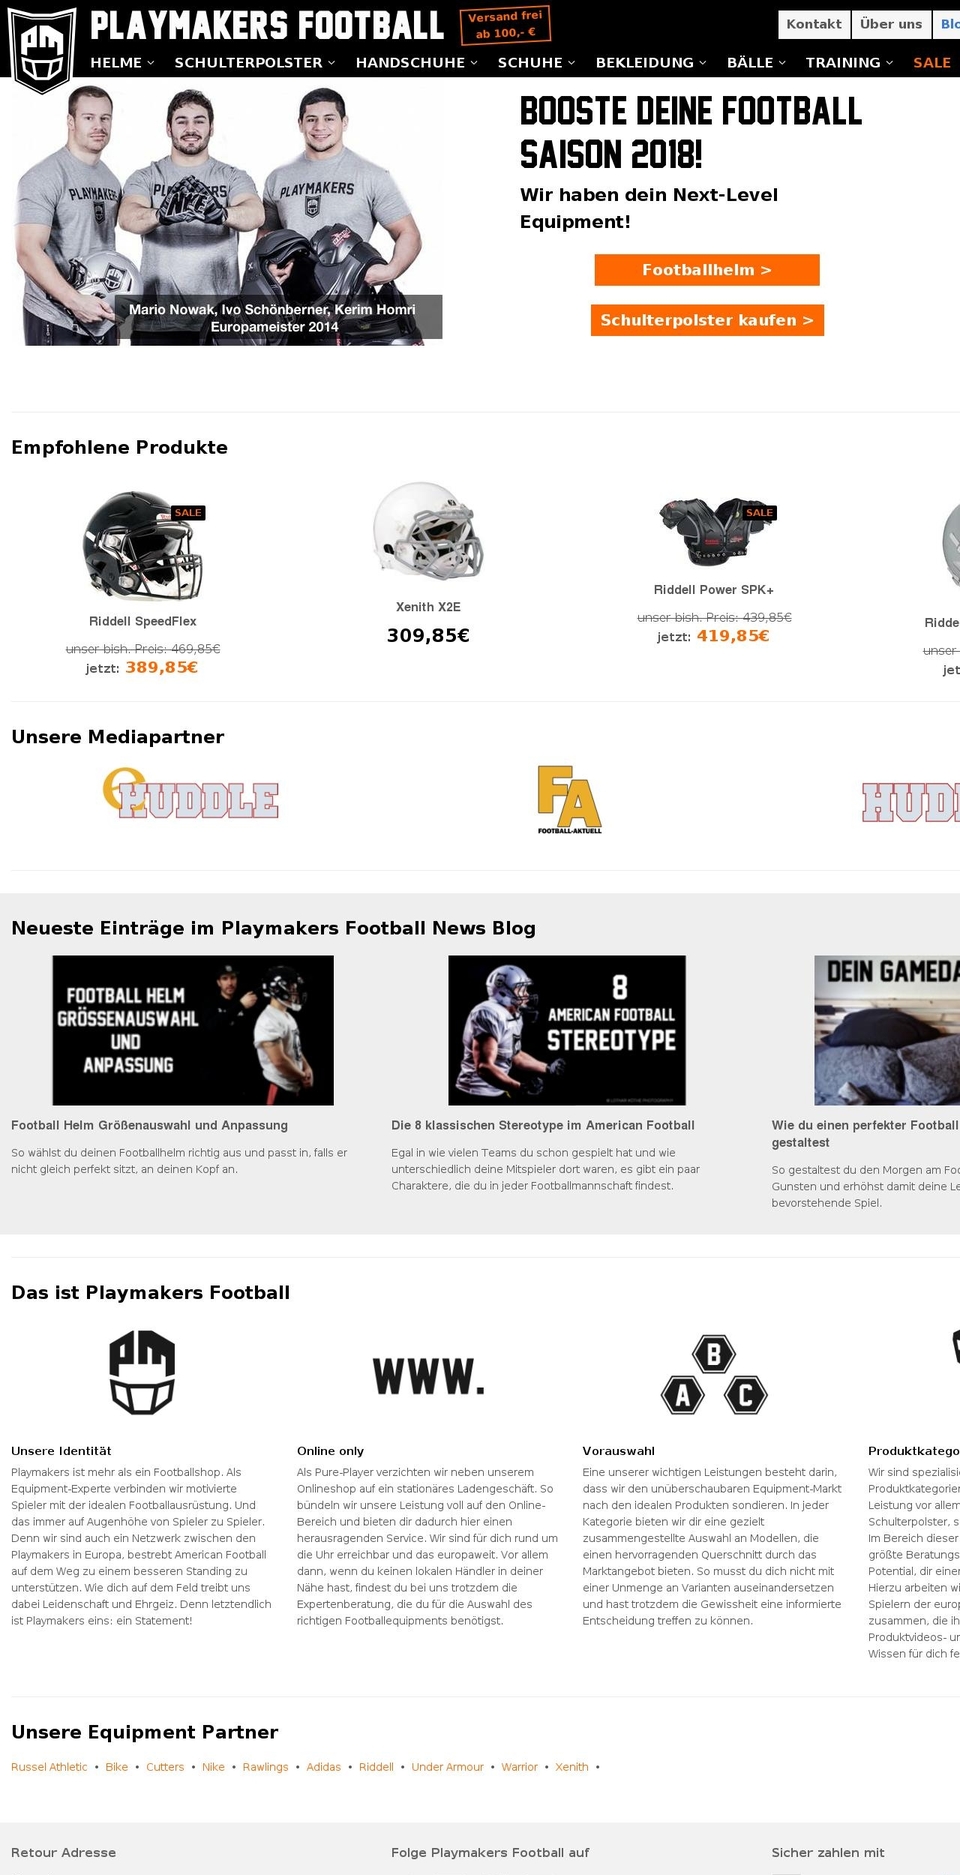 Playmakers Football v2 Shopify theme site example playmakers.football